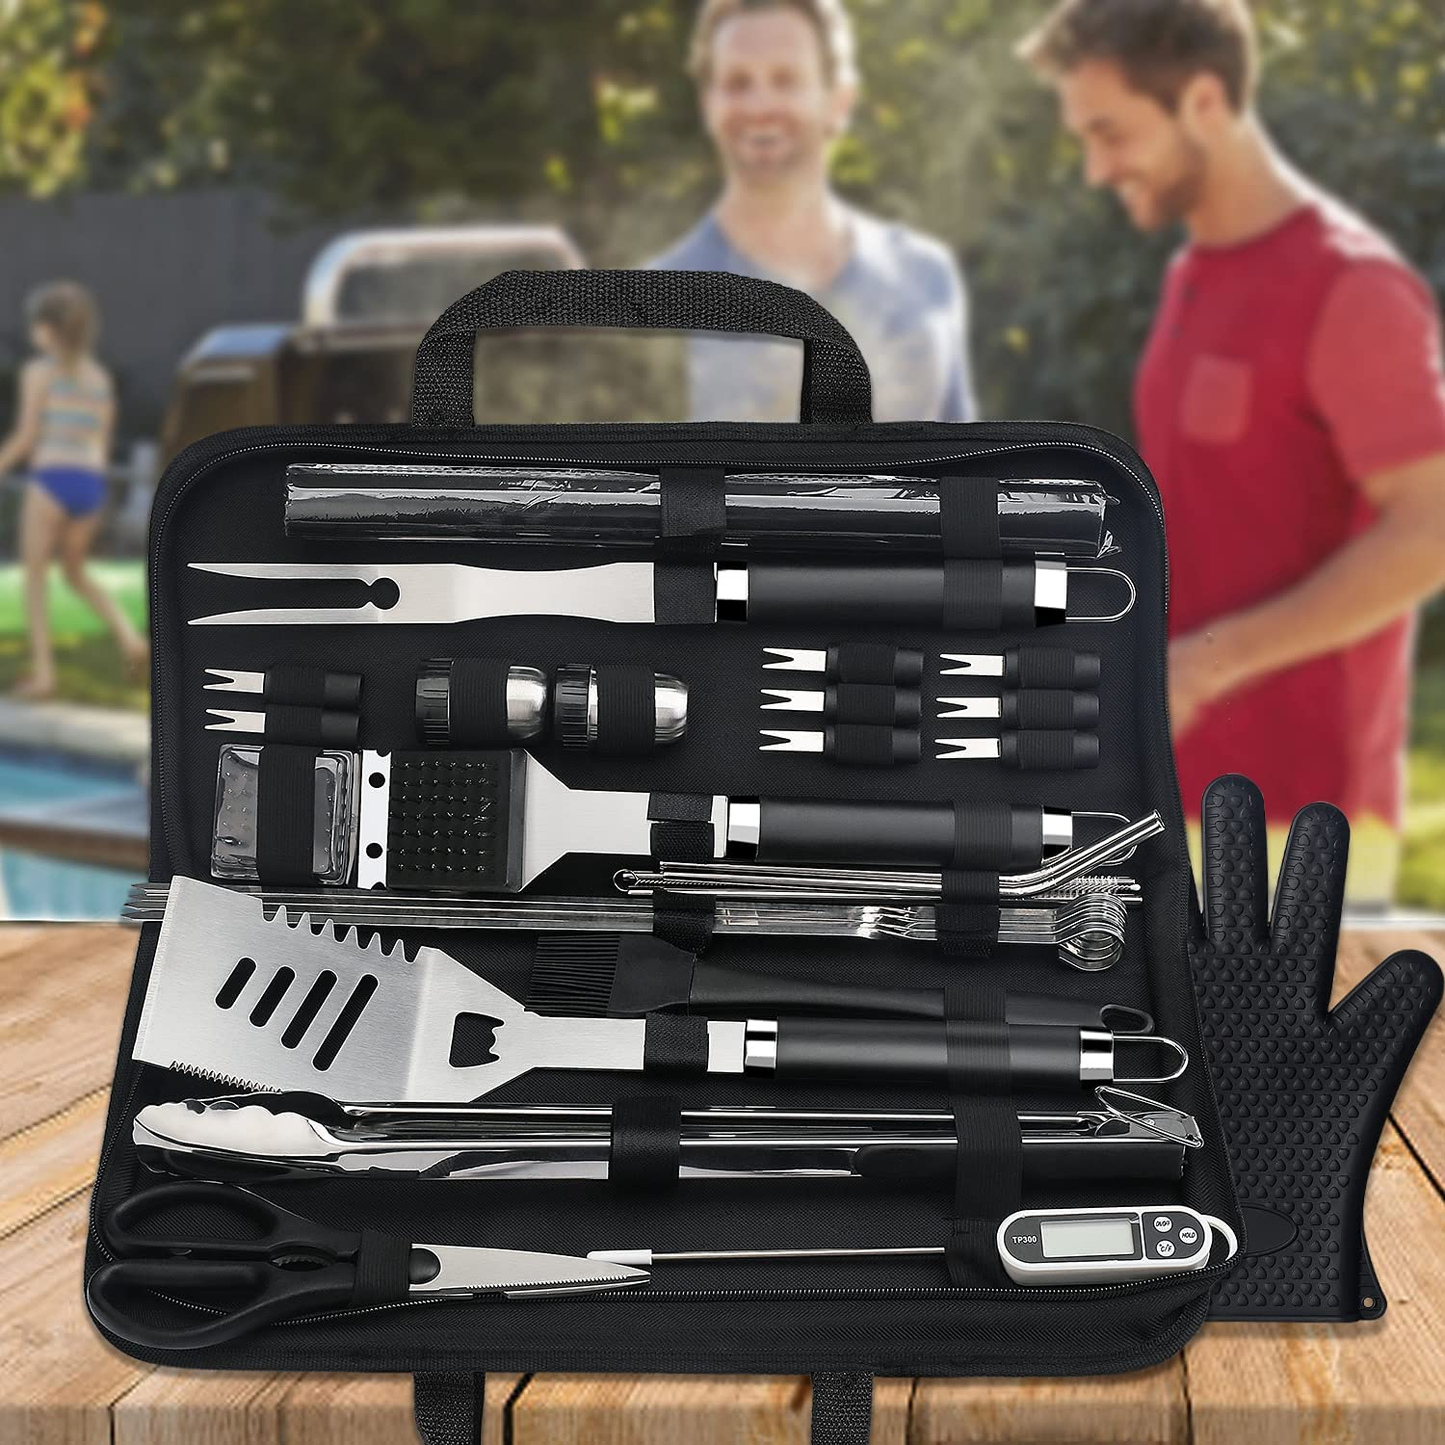 TMACTIME 31pcs BBQ Accessories, High-Quality Stainless Steel Barbecue Tool Set with Carrying Bag - Perfect Grill Accessories for Camping, Traveling